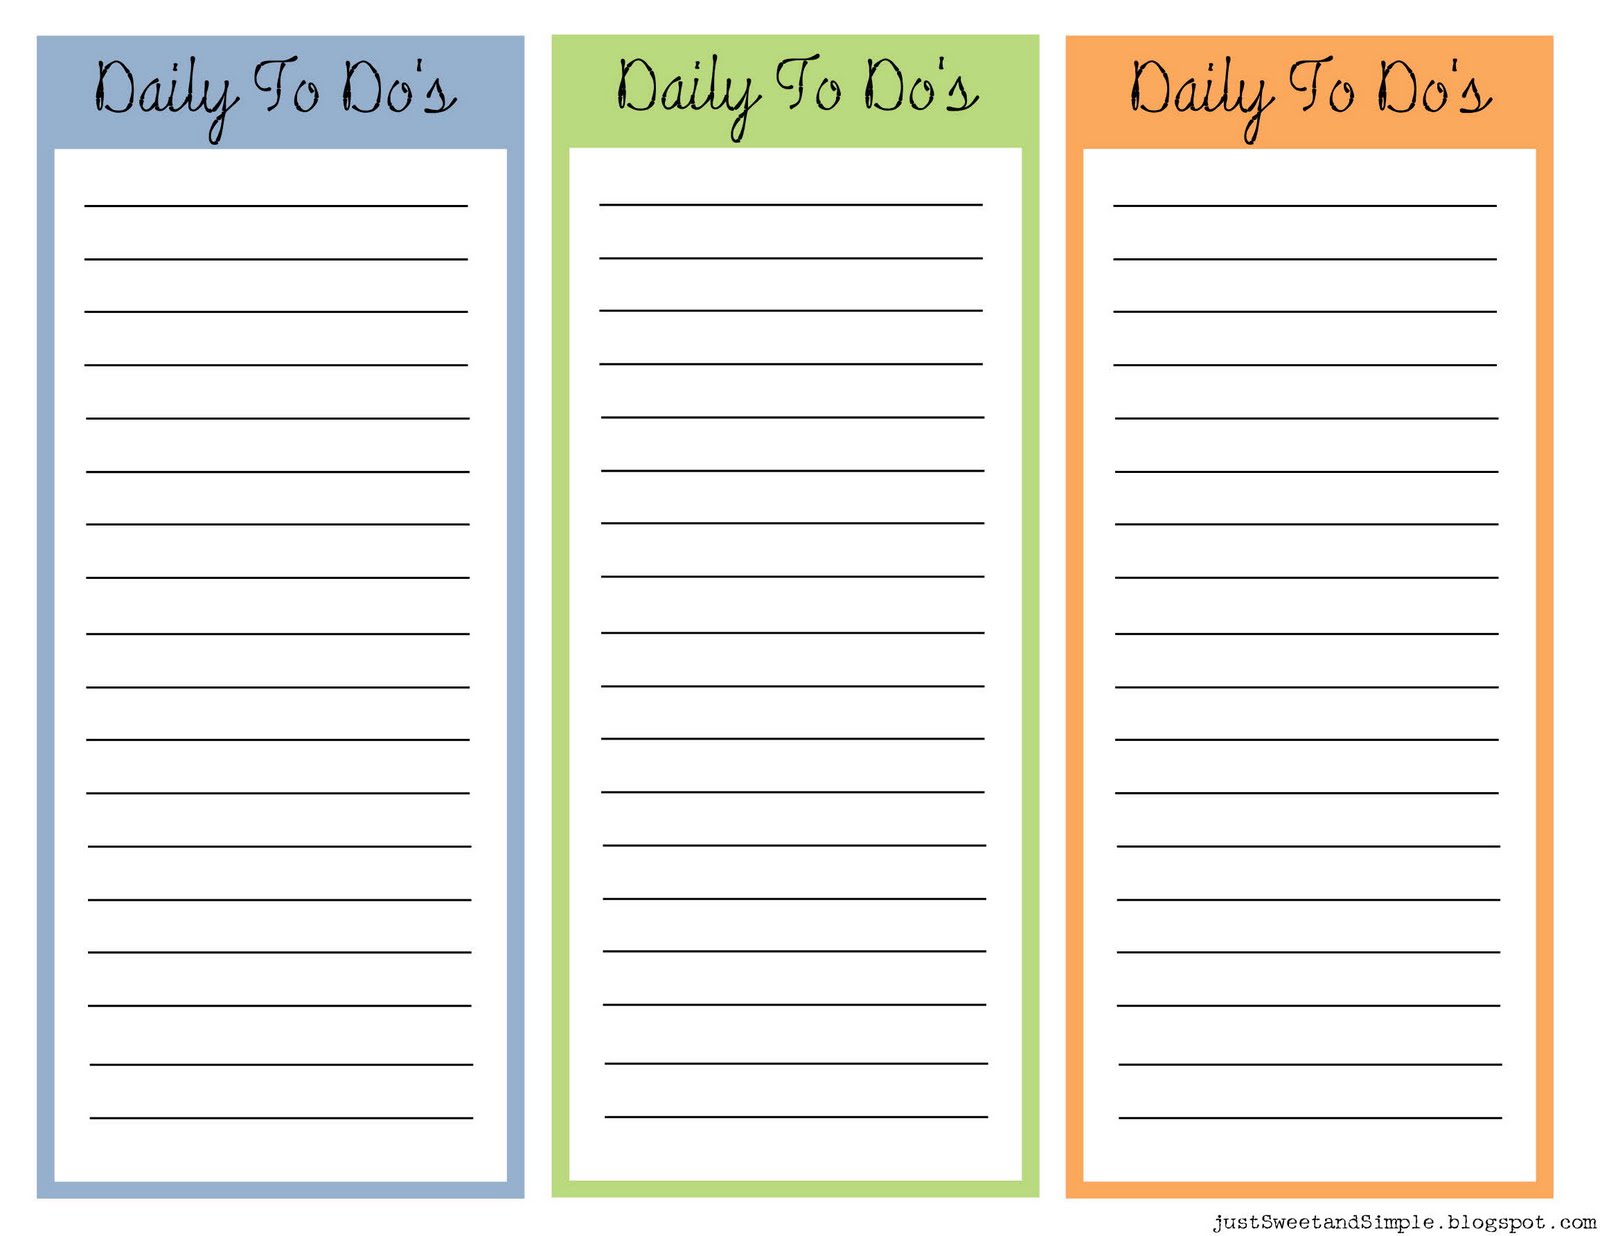 Just Sweet And Simple Printable Little Daily To Do Lists.